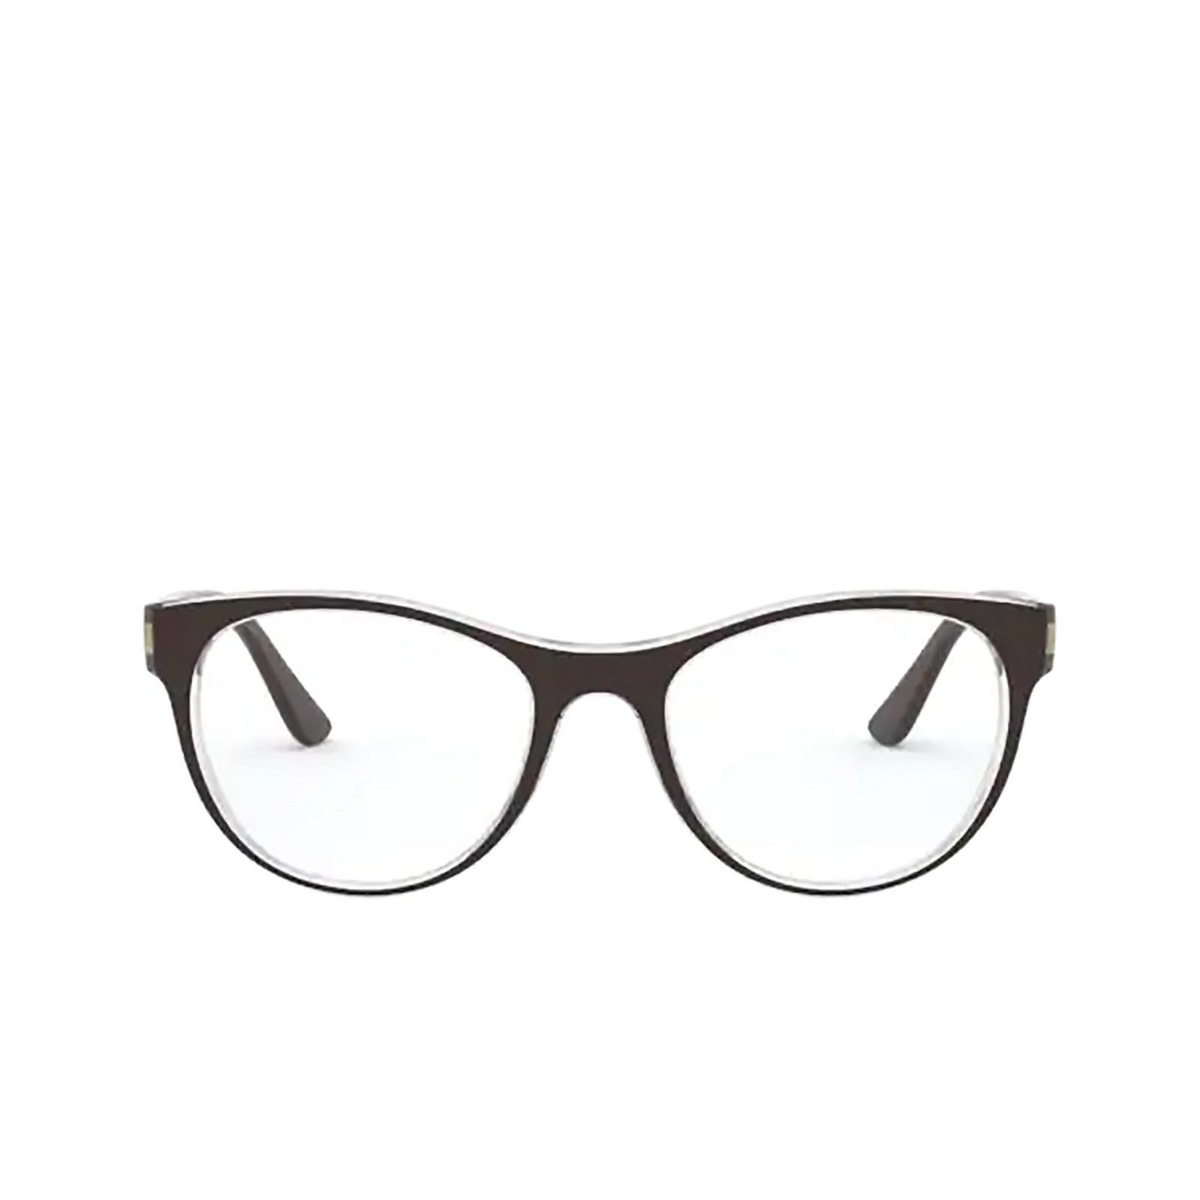 Vogue® Cat-eye Eyeglasses: VO5336 color Top Brown / Serigraphy 2842 - front view.